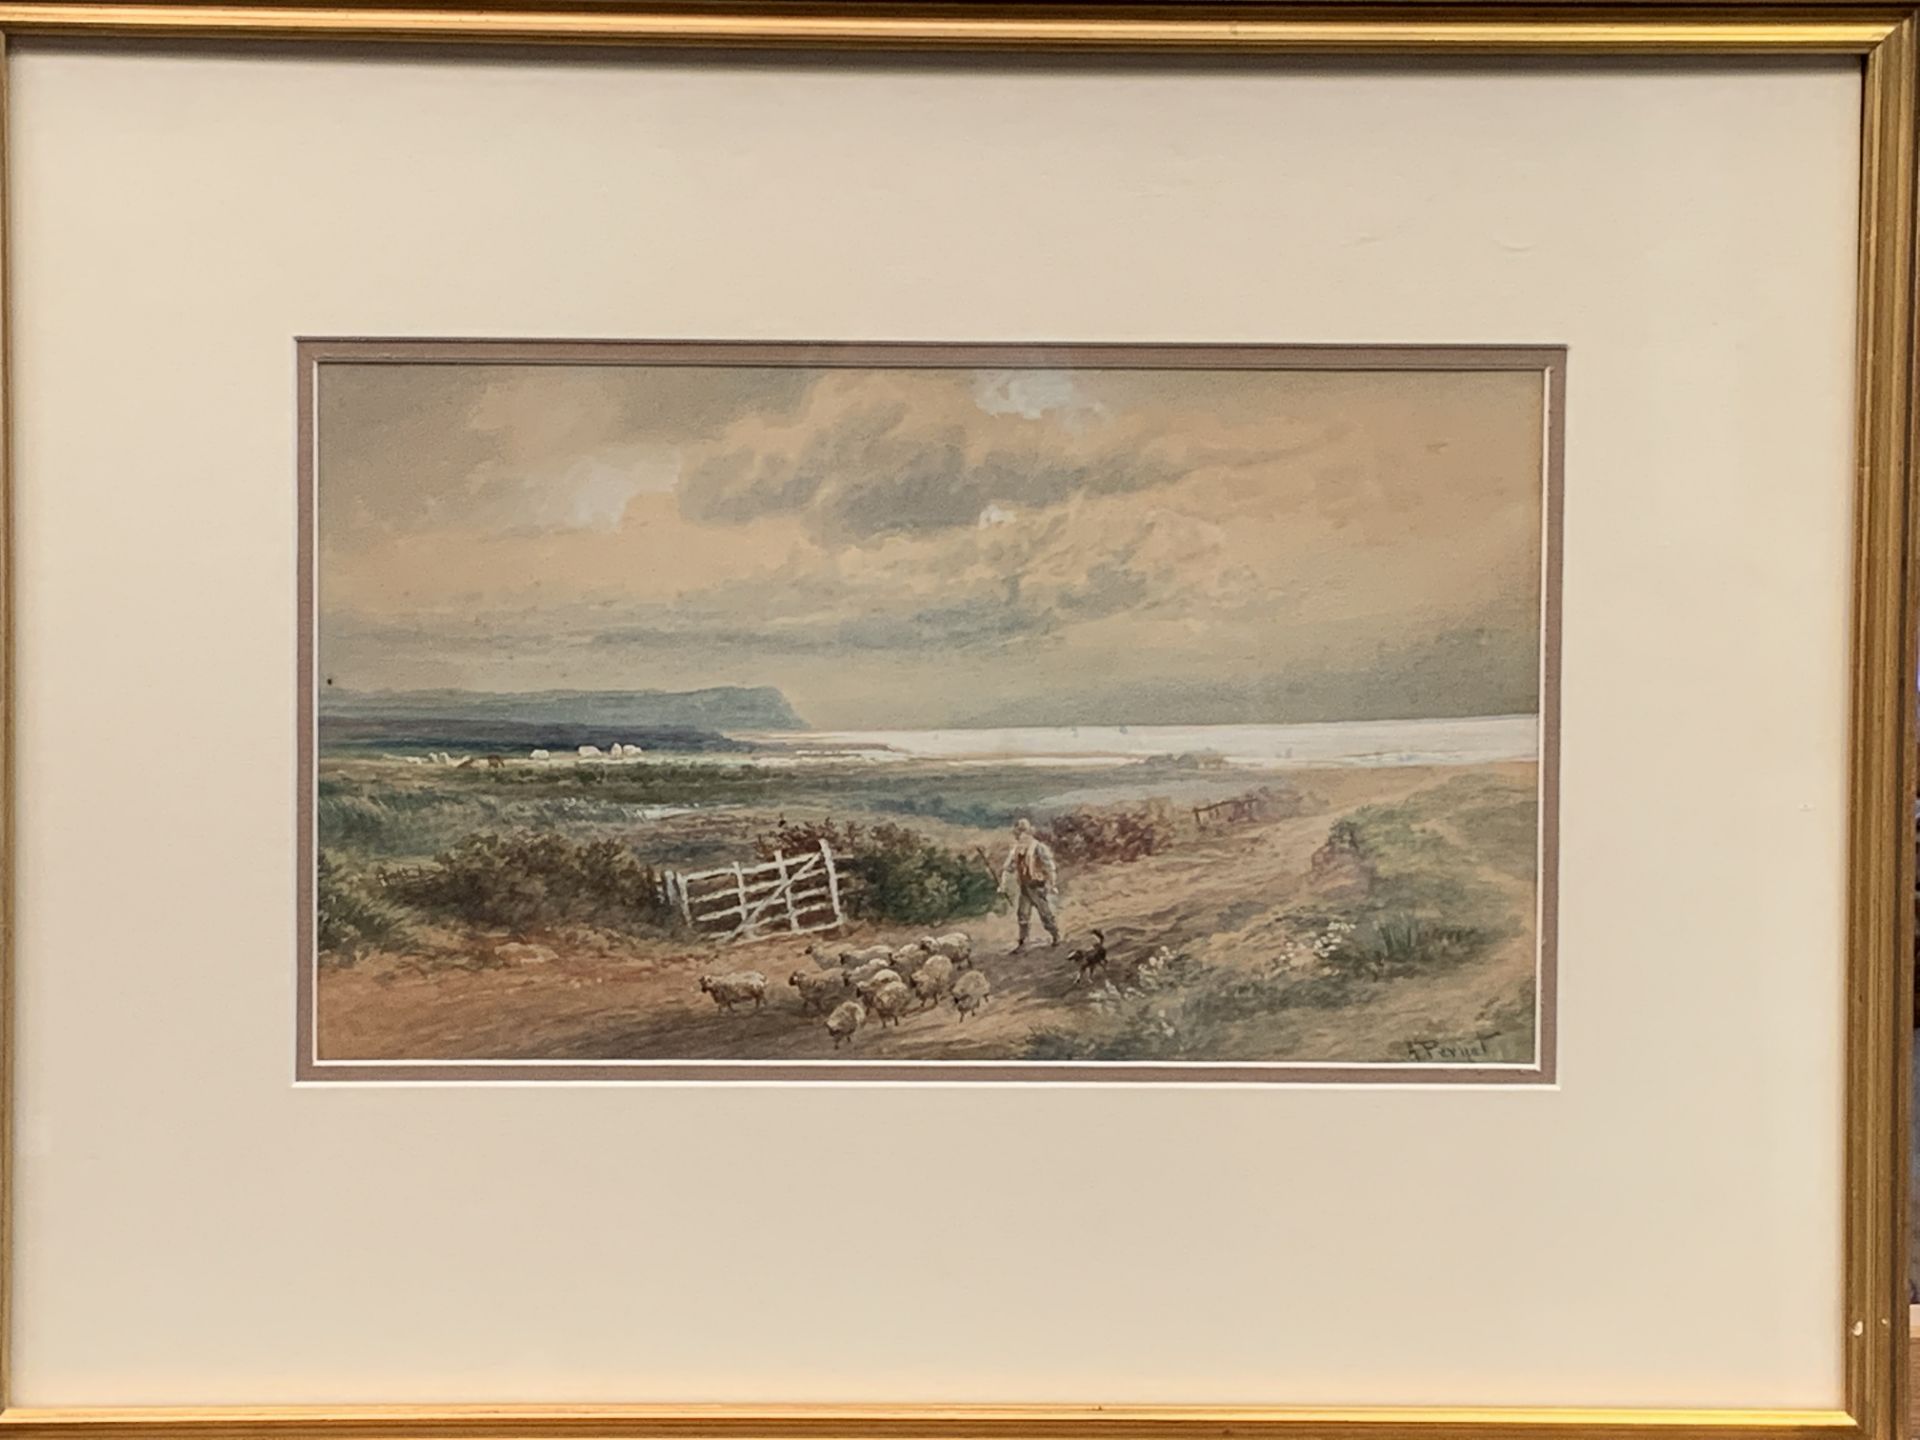 A. Pergot - framed and glazed watercolour